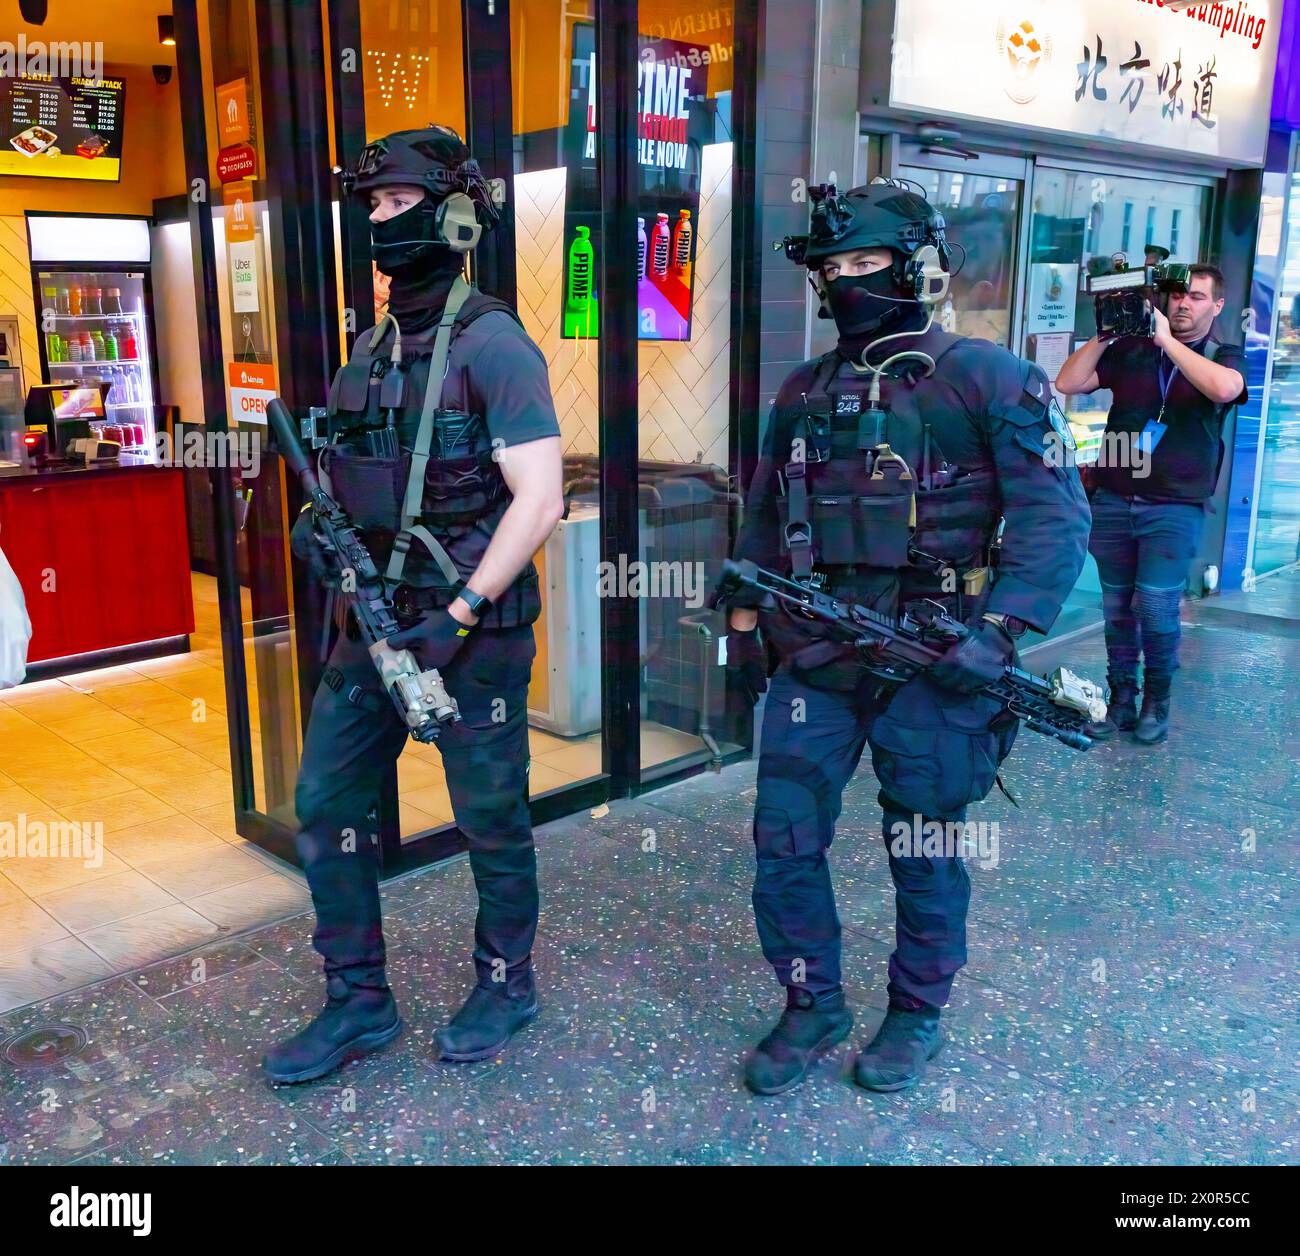 Sydney, Australia. 13 April 2024. A heavy police presence and lockdown has occurred at the Westfield shopping centre in Bondi Junction after a knife-wielding assassin attacked shoppers. Seven victims are confirmed dead, including the attacker, with another seven in critical condition in hospital. Credit: Robert Wallace / Wallace Media Network / Alamy Live News Stock Photo